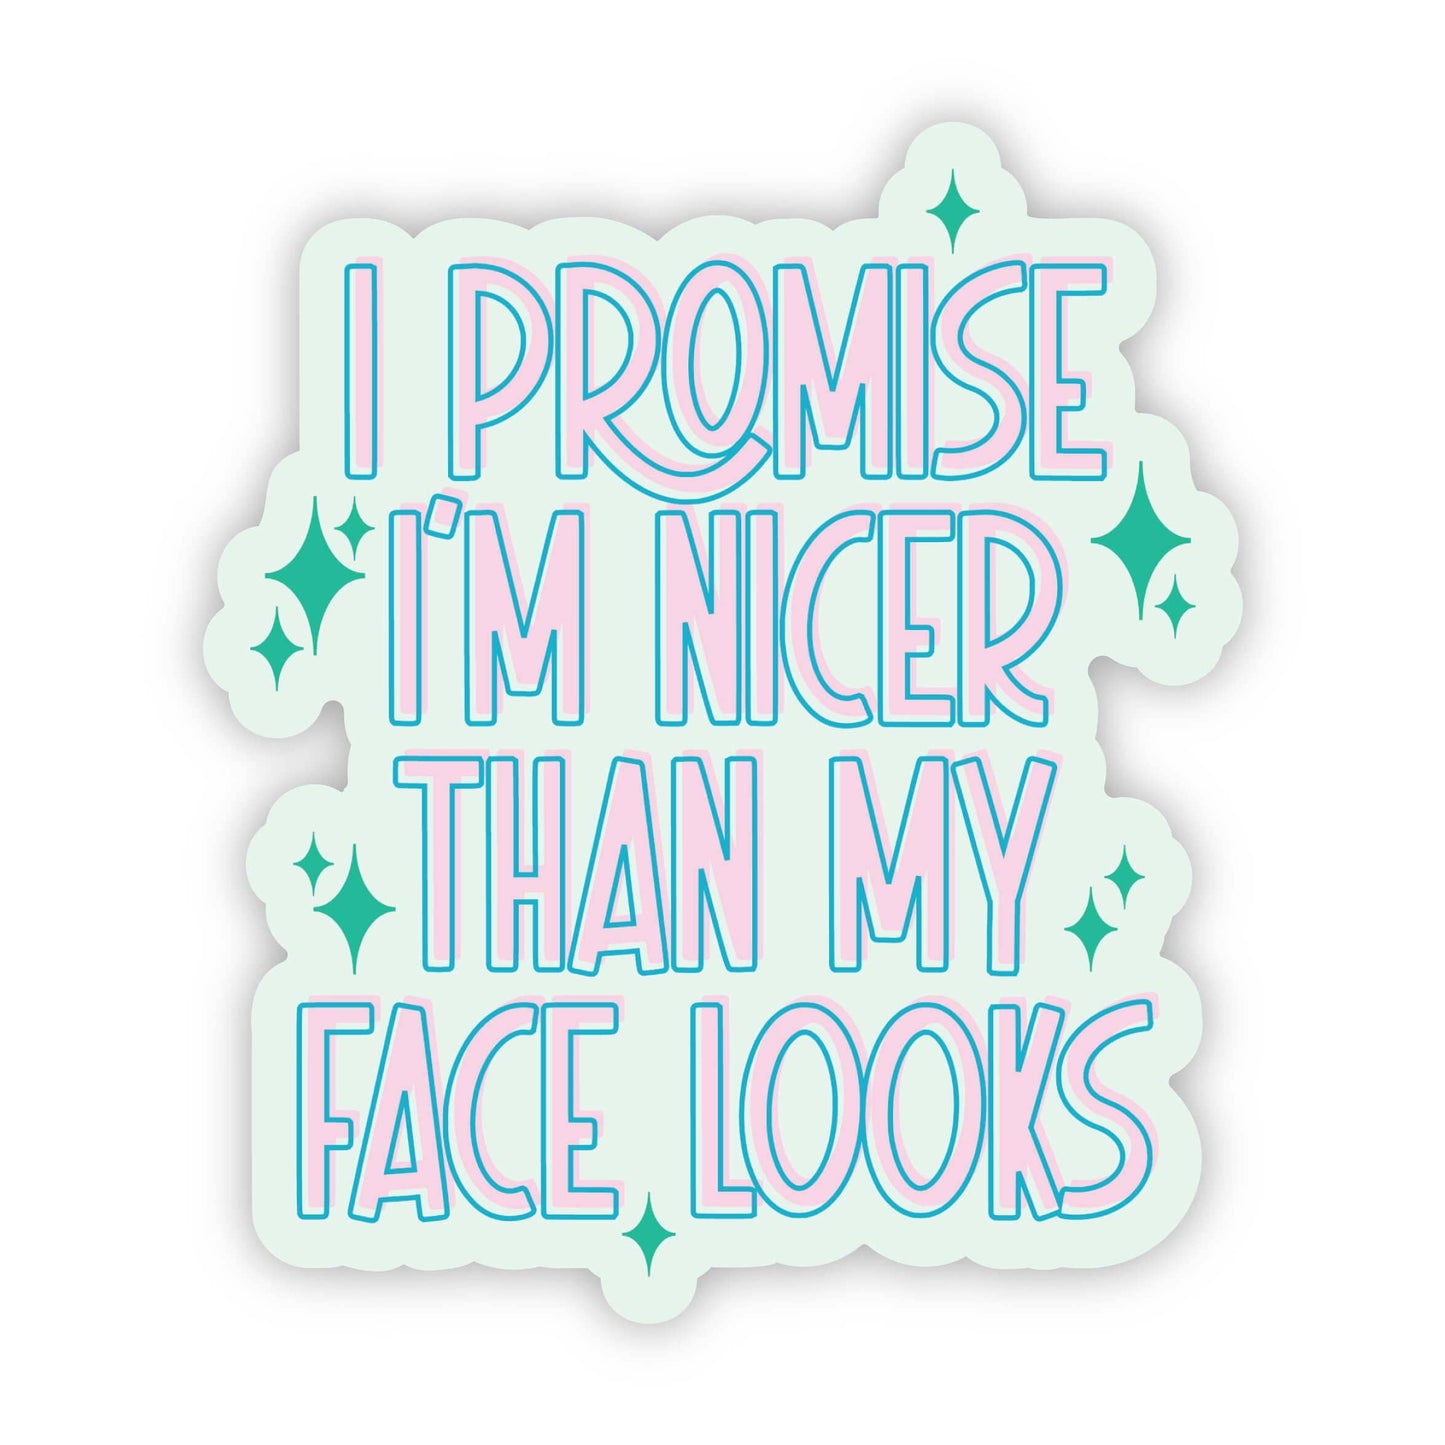 I Promise I'm Nicer Than my Face Looks Sticker - funny relatable stickers